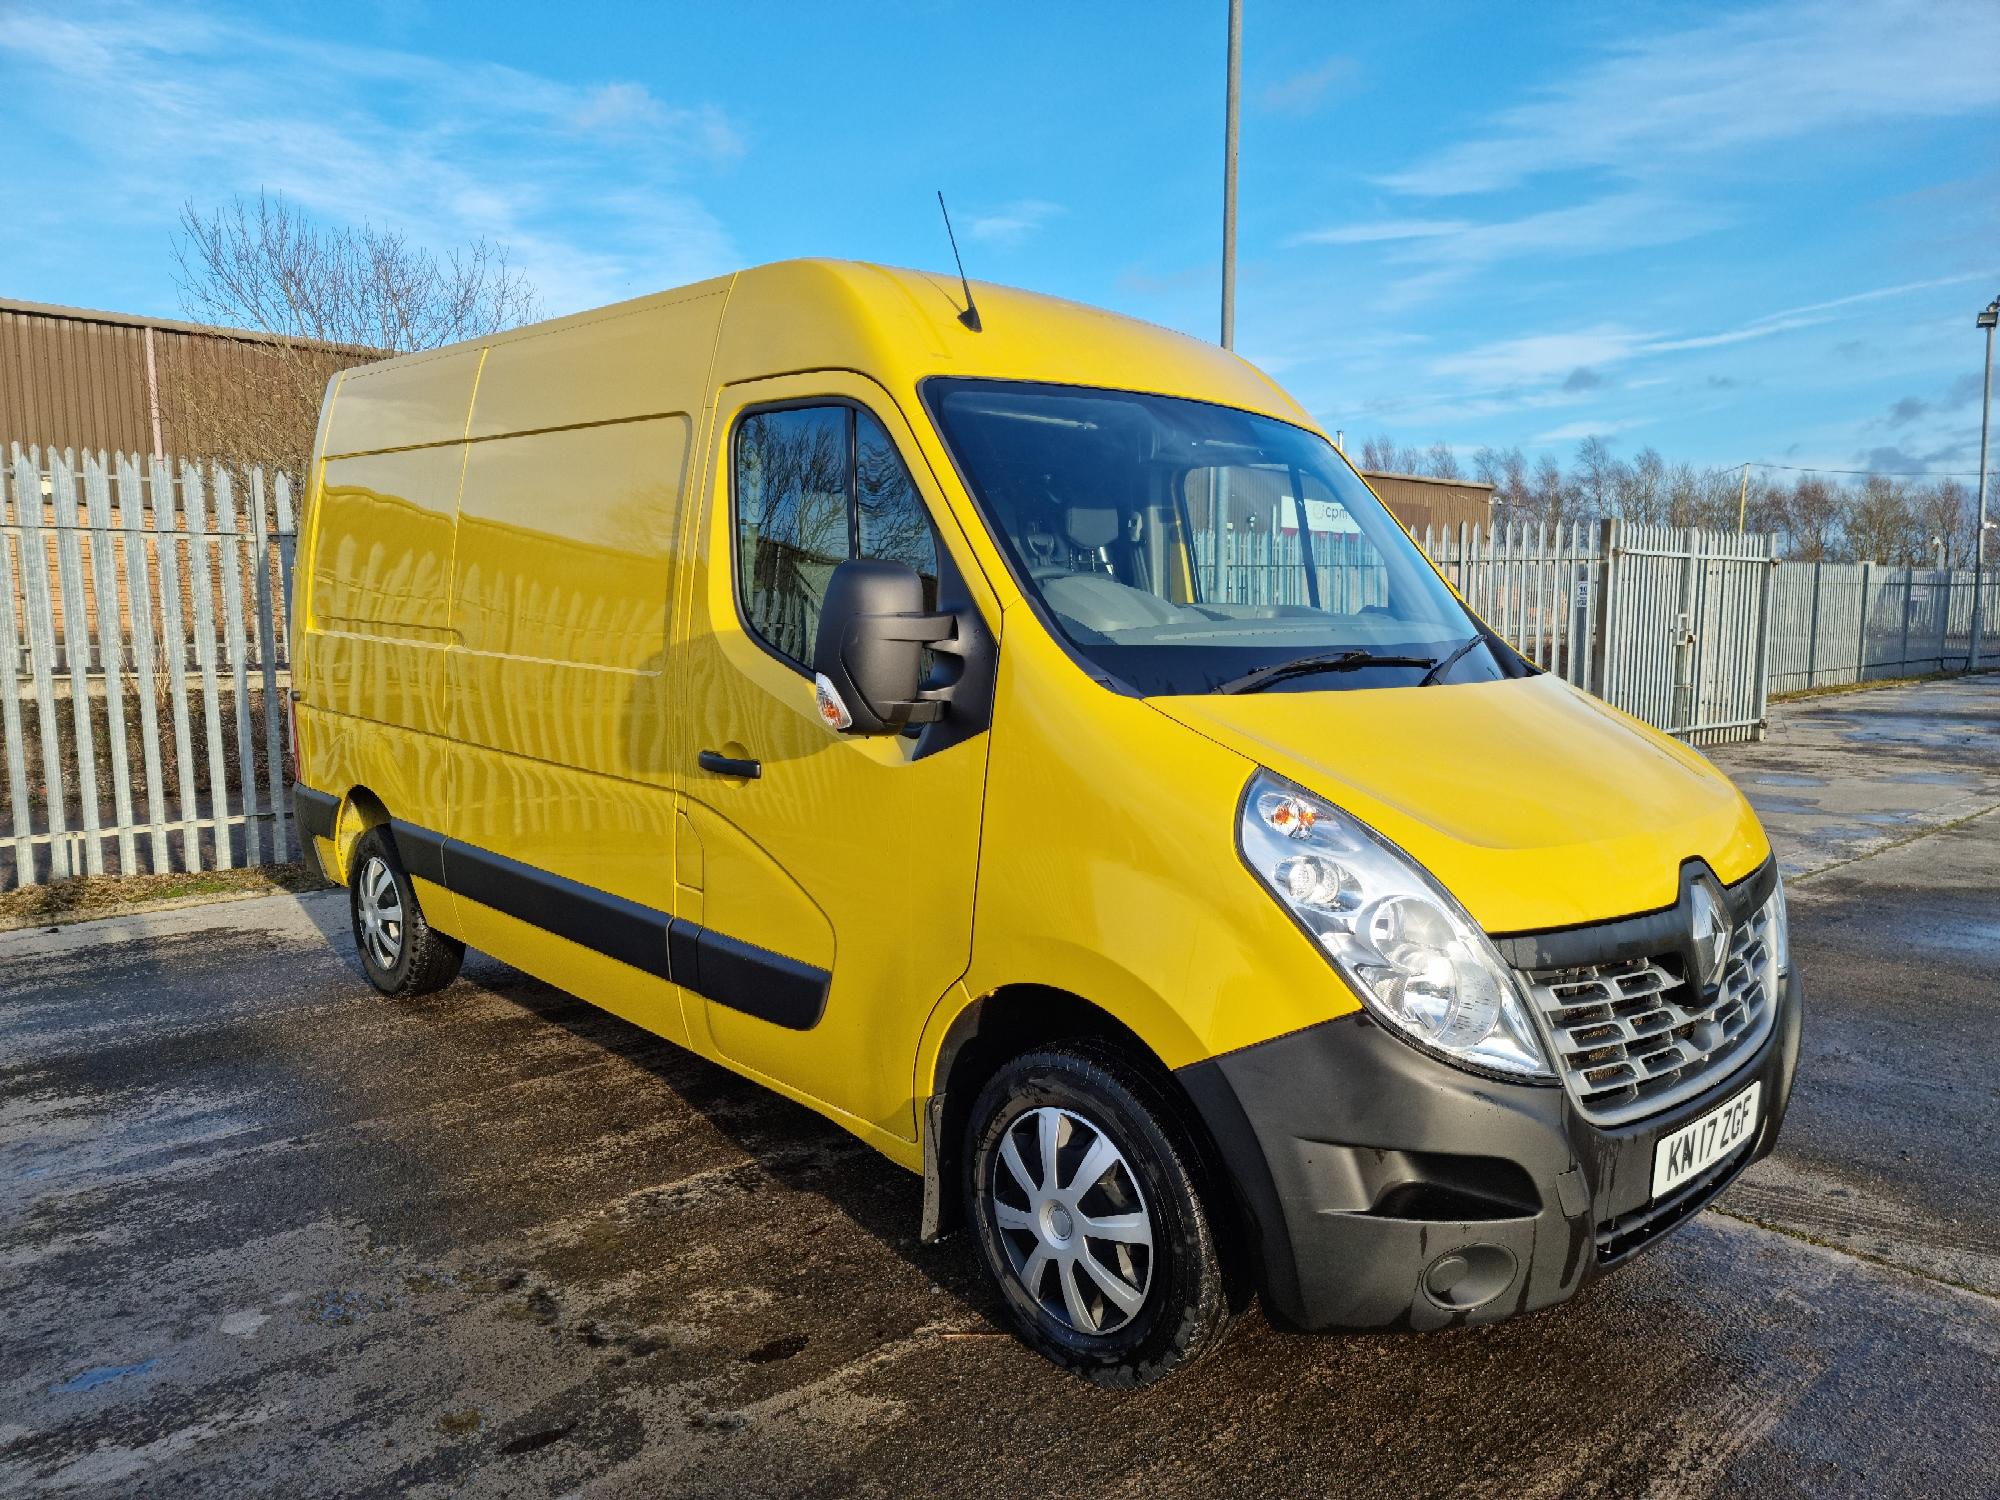 2017 Renault Master Panel Van, Day Cab, Manual Gearbox, 111,303 Miles, Rear & Side Opening Doors, Finance Options Available.